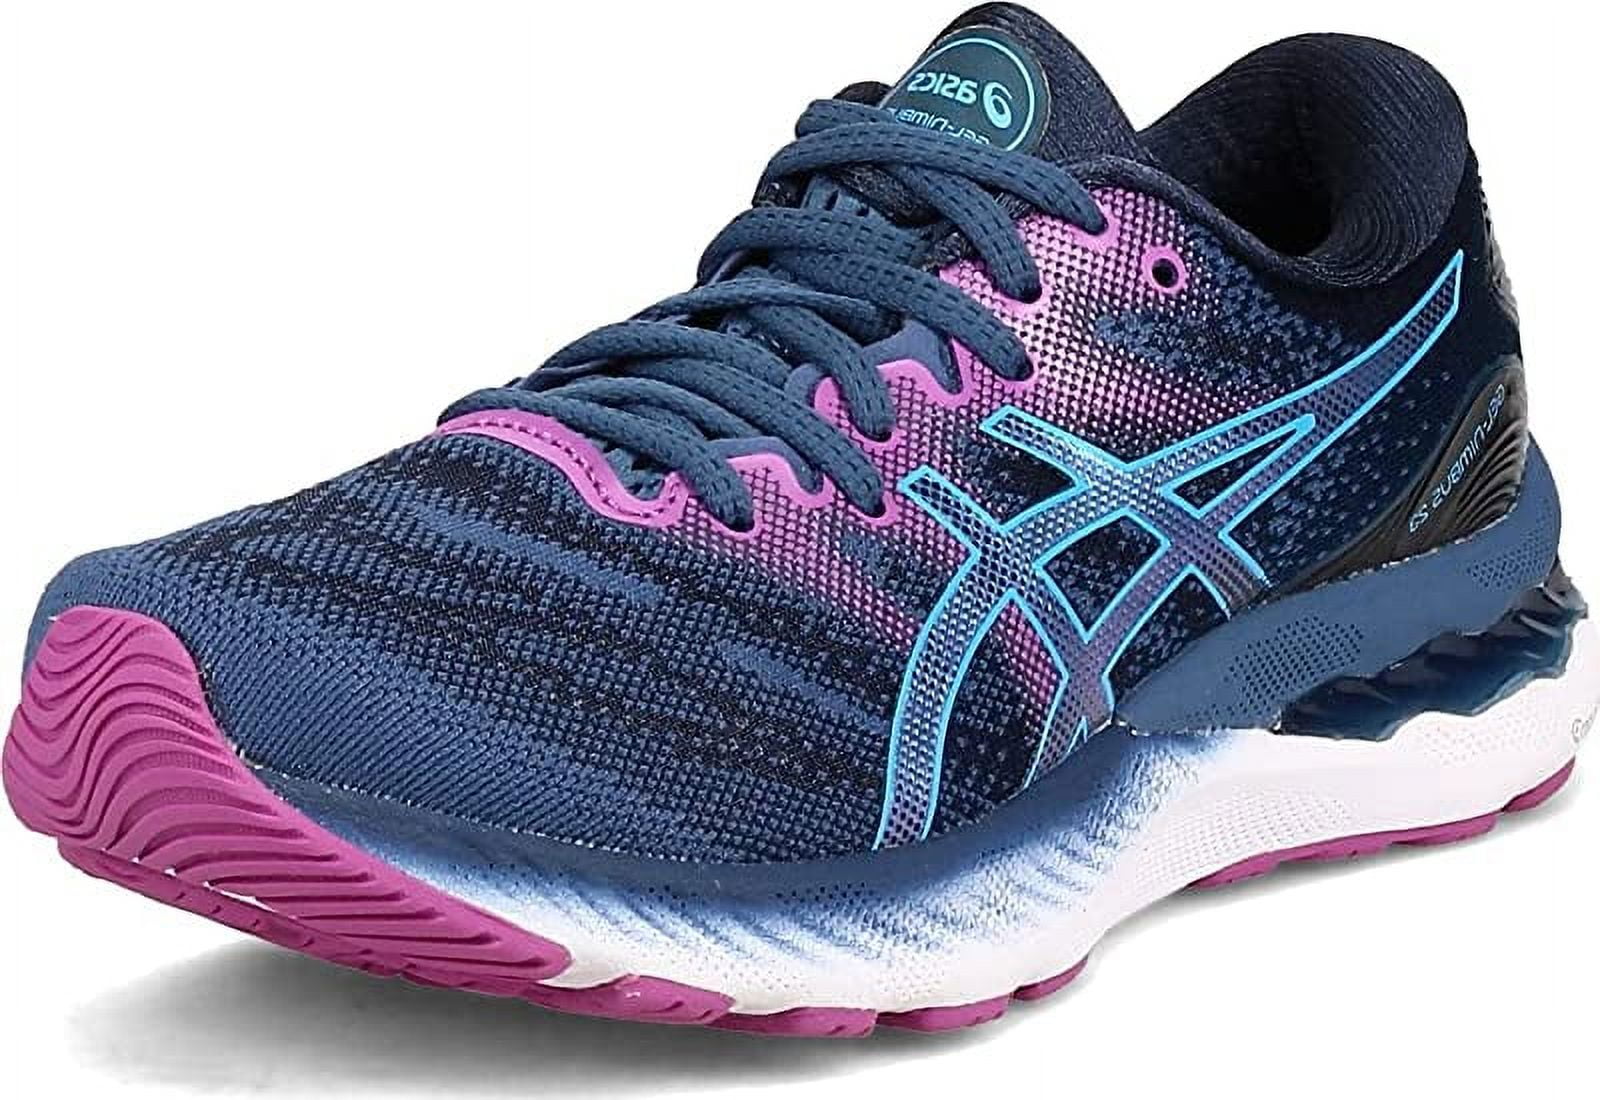 Women's GEL-EXCITE TRAIL, Deep Sea Teal/Clear Blue, Running Shoes